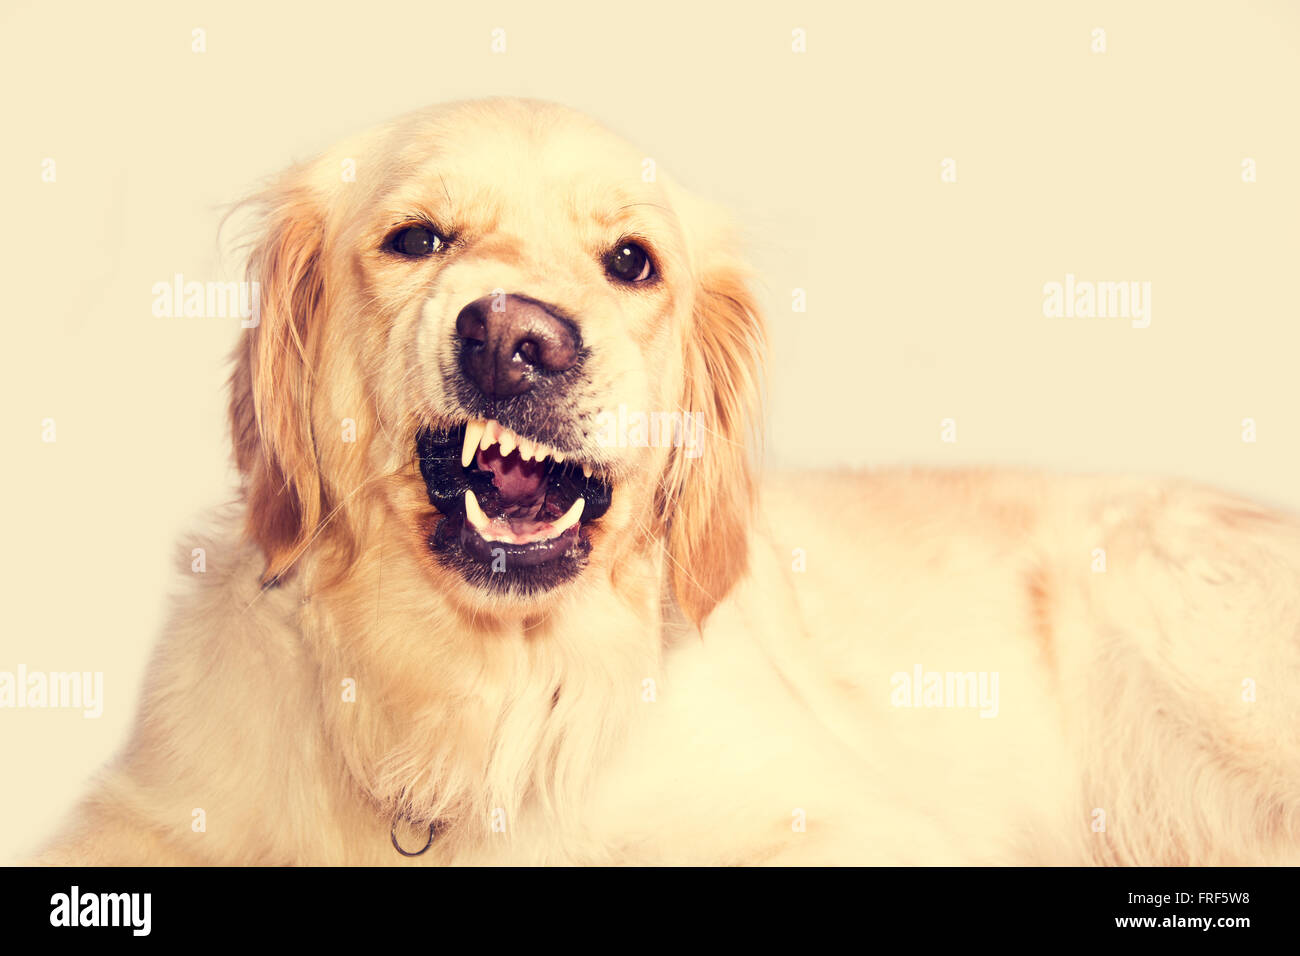 Angry golden retriever dog shows teeth. Pets. Stock Photo